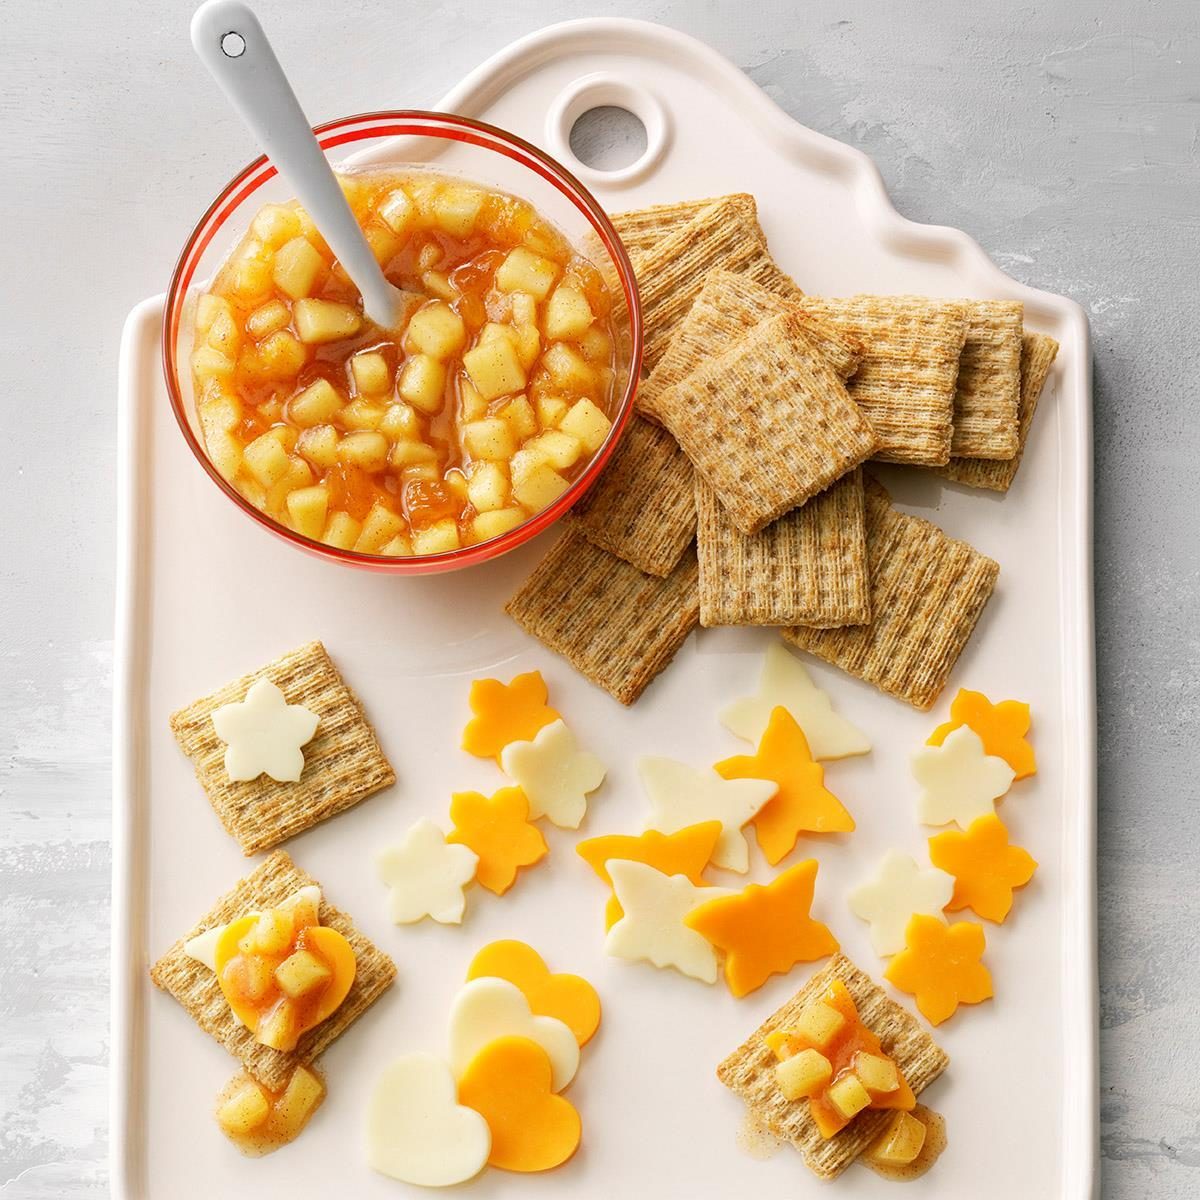 20 Fun, Healthy Snacks for Kids